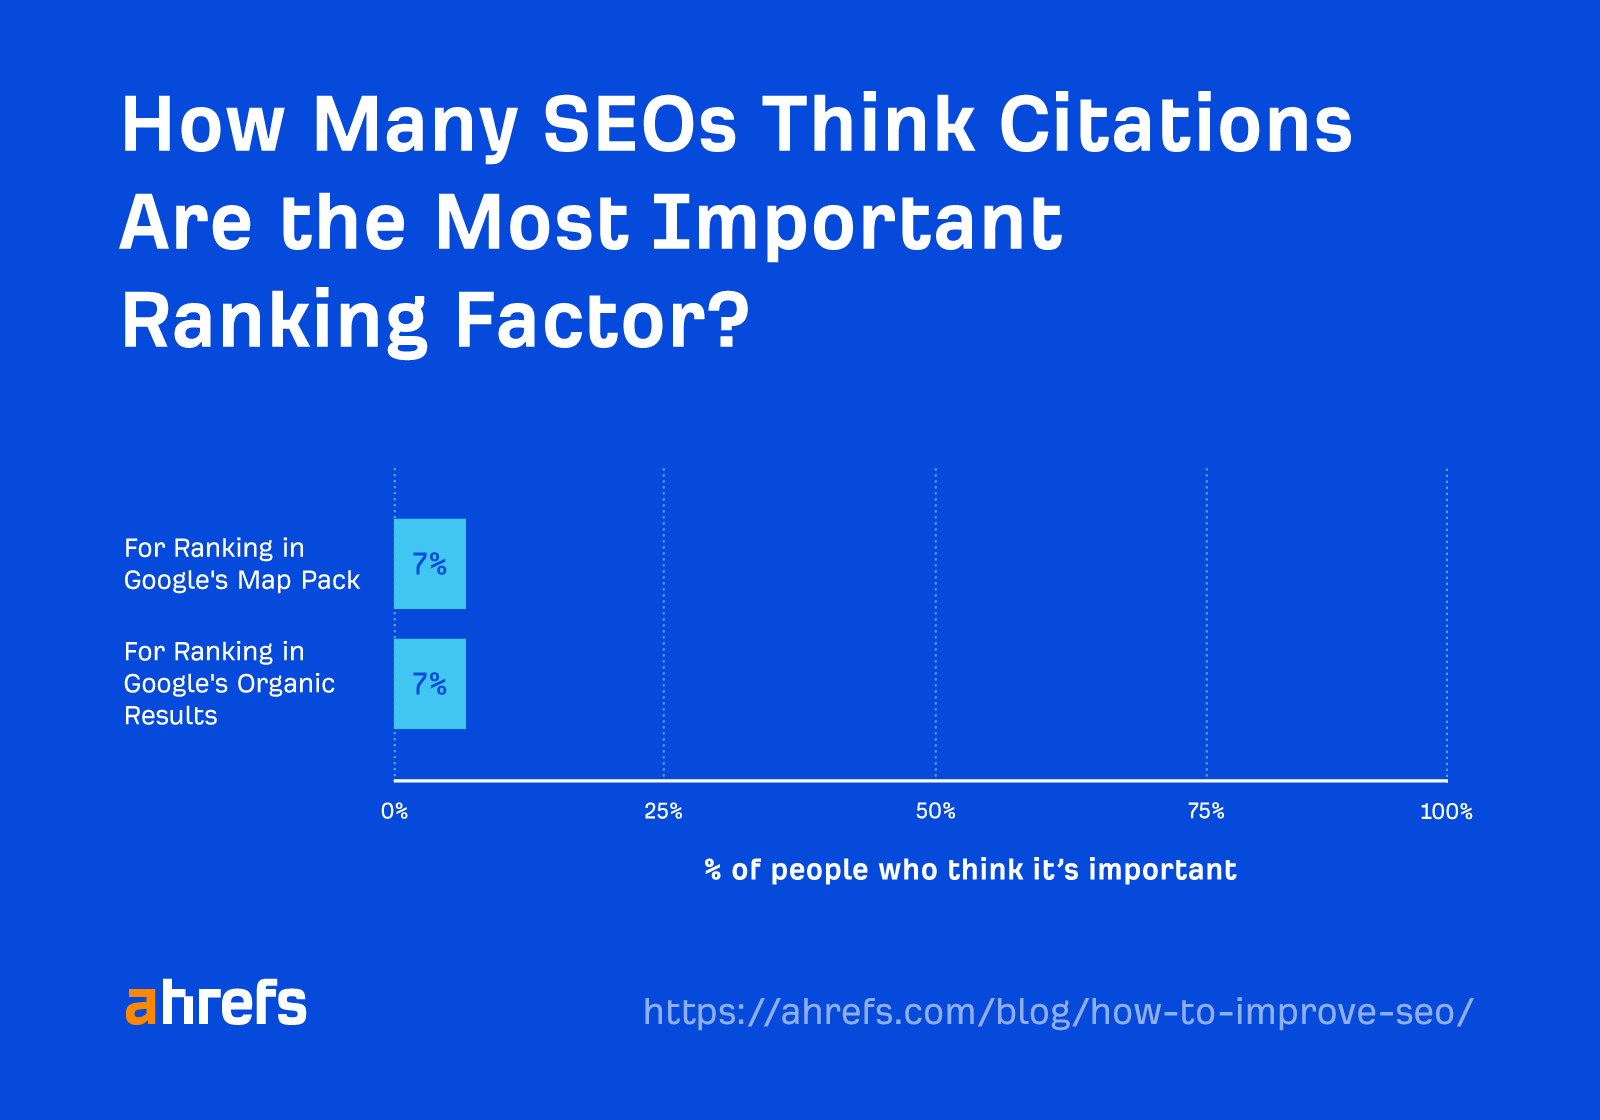 A poll for how many SEOs think citations are the most important ranking factor